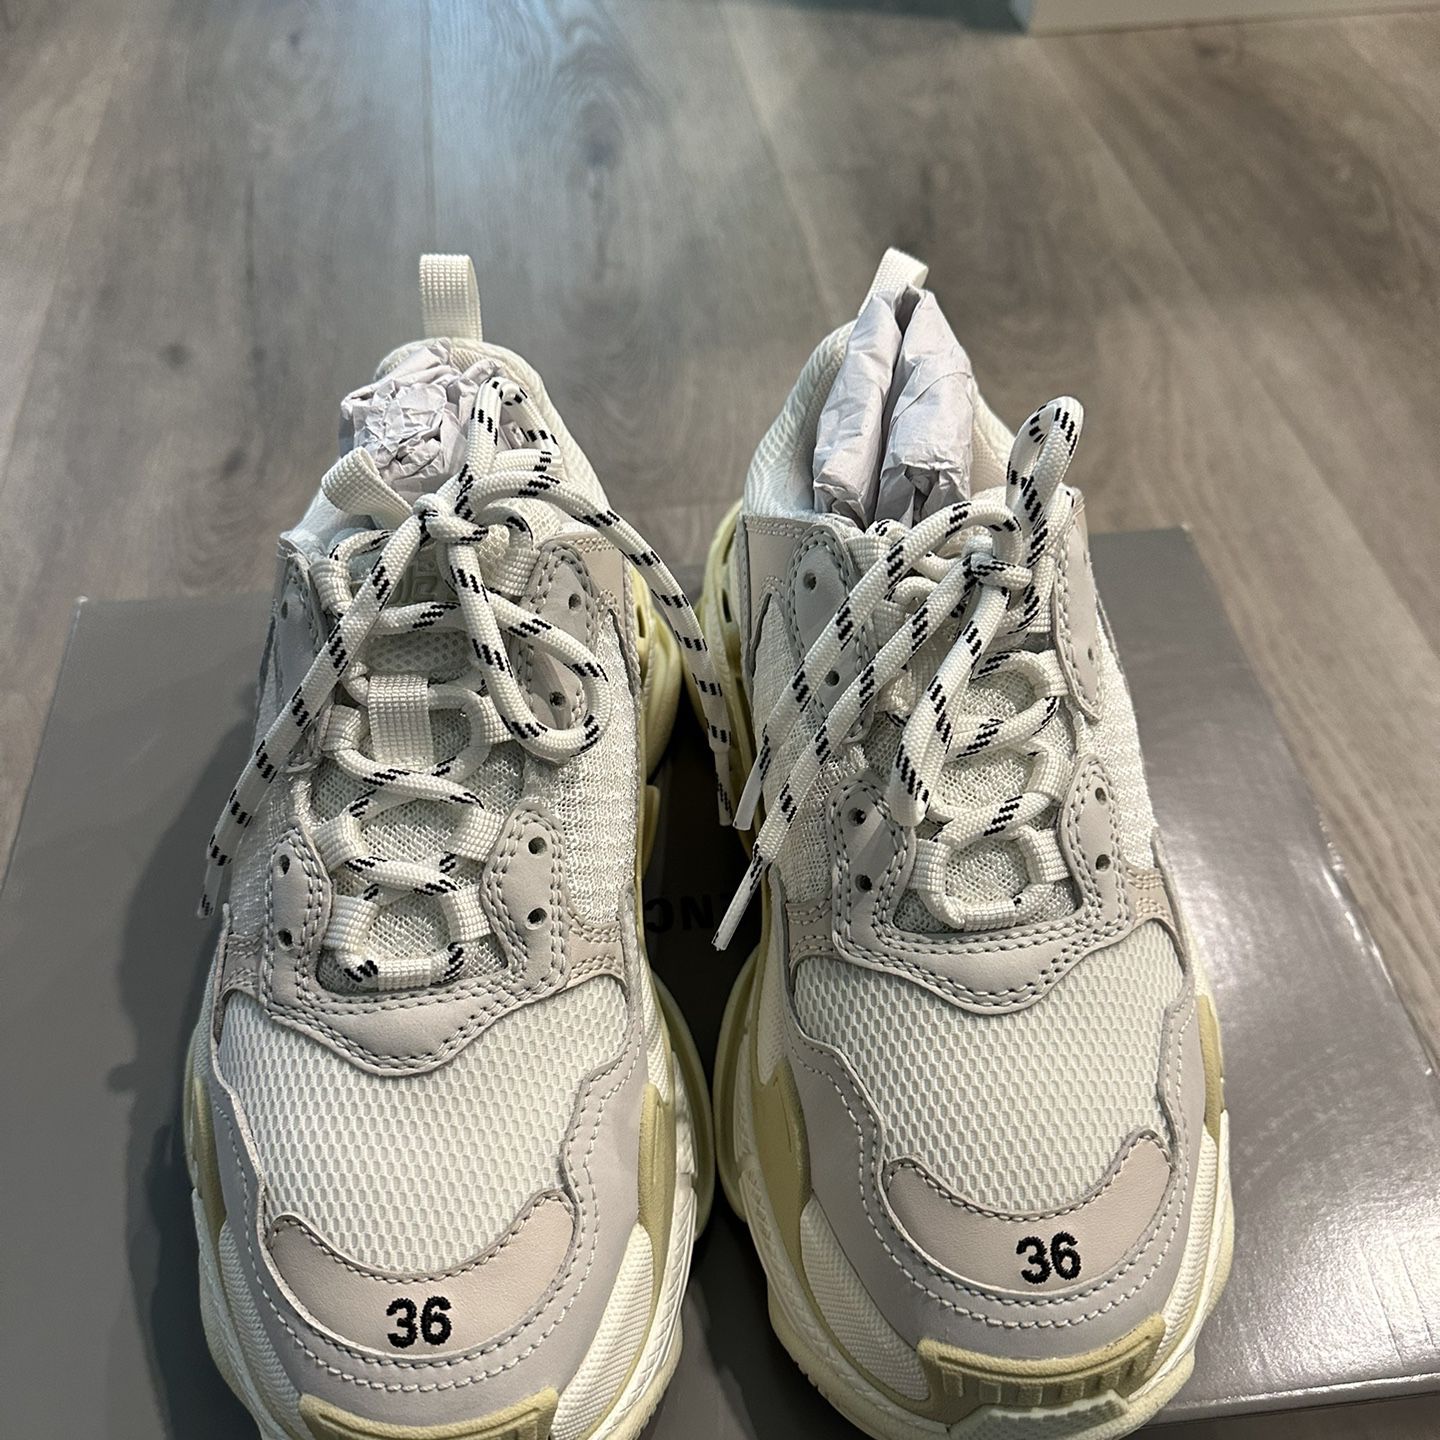 100% Authentic Balenciaga Sneakers Size 36 Only Wear Once!